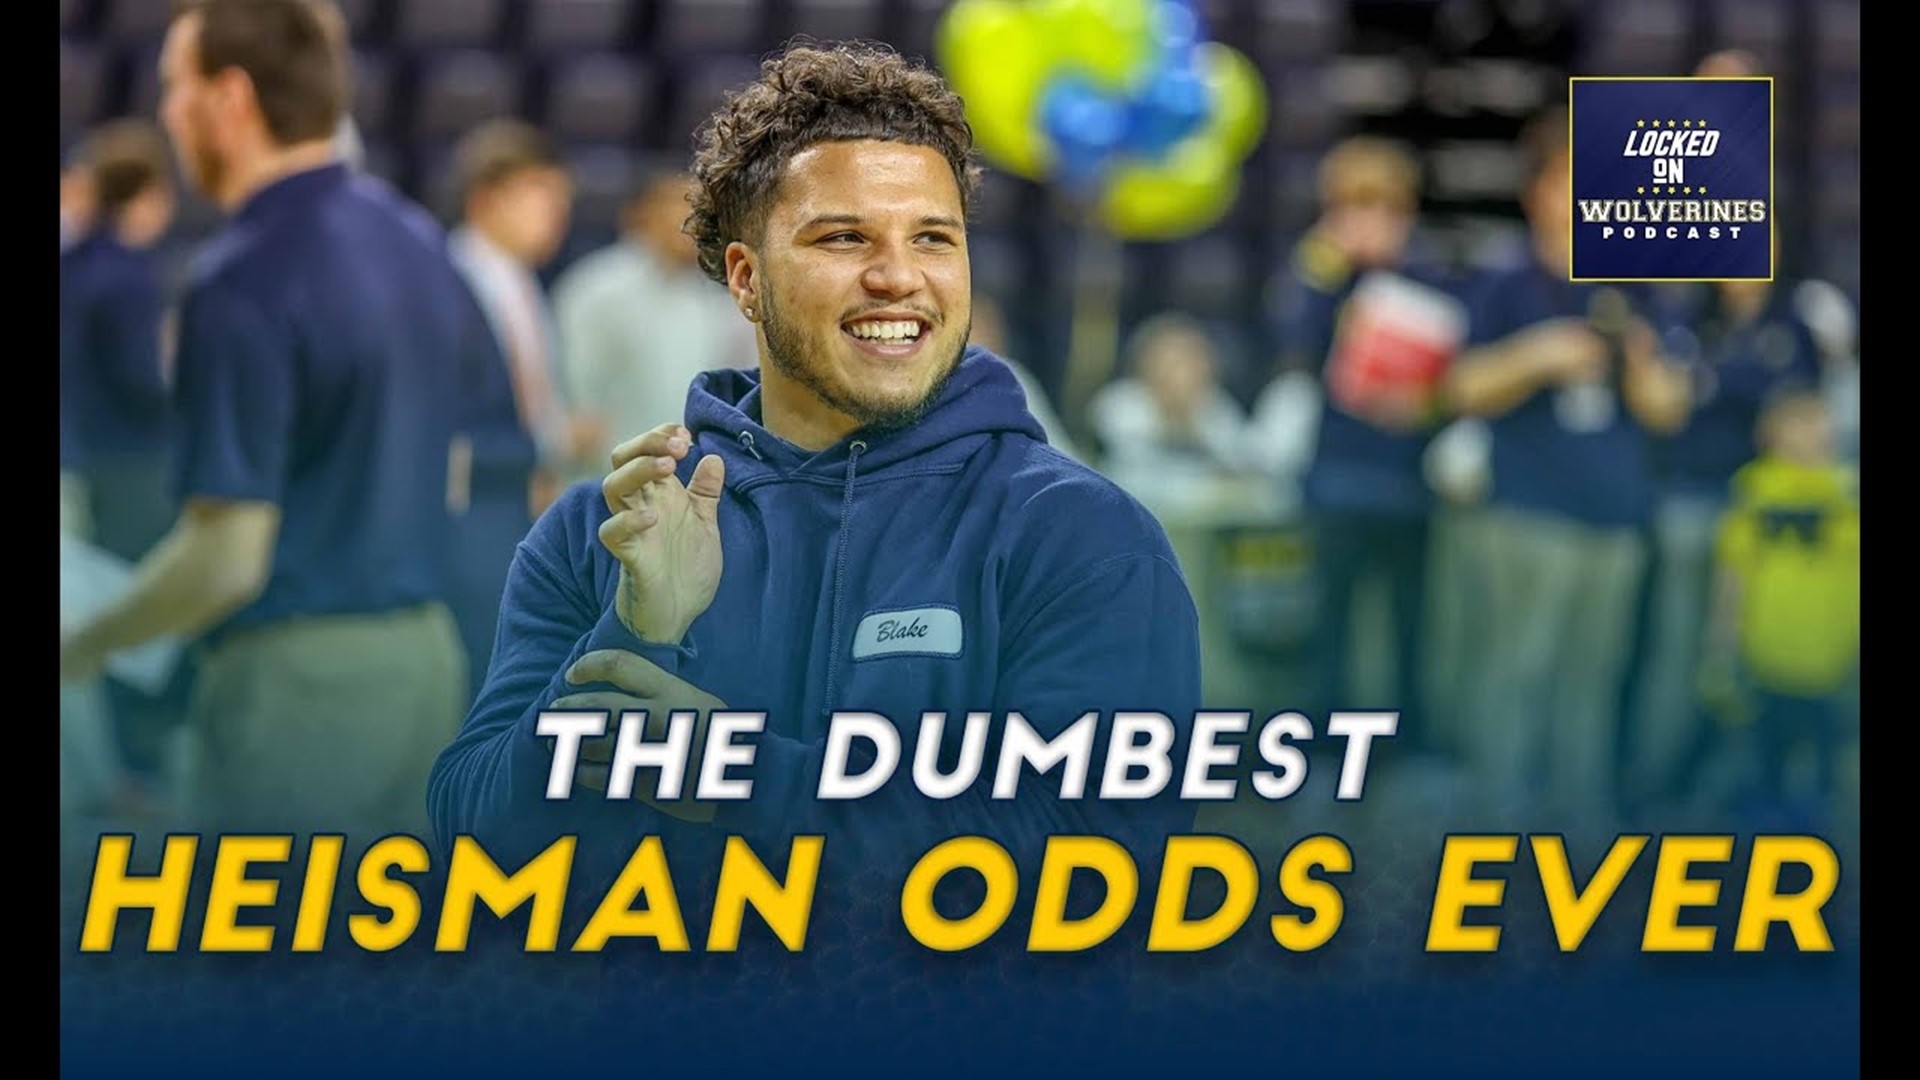 We've seen 2023 Heisman Trophy odds circulating of late and for whatever reason, some unproven quarterbacks are all ahead of some Michigan football players